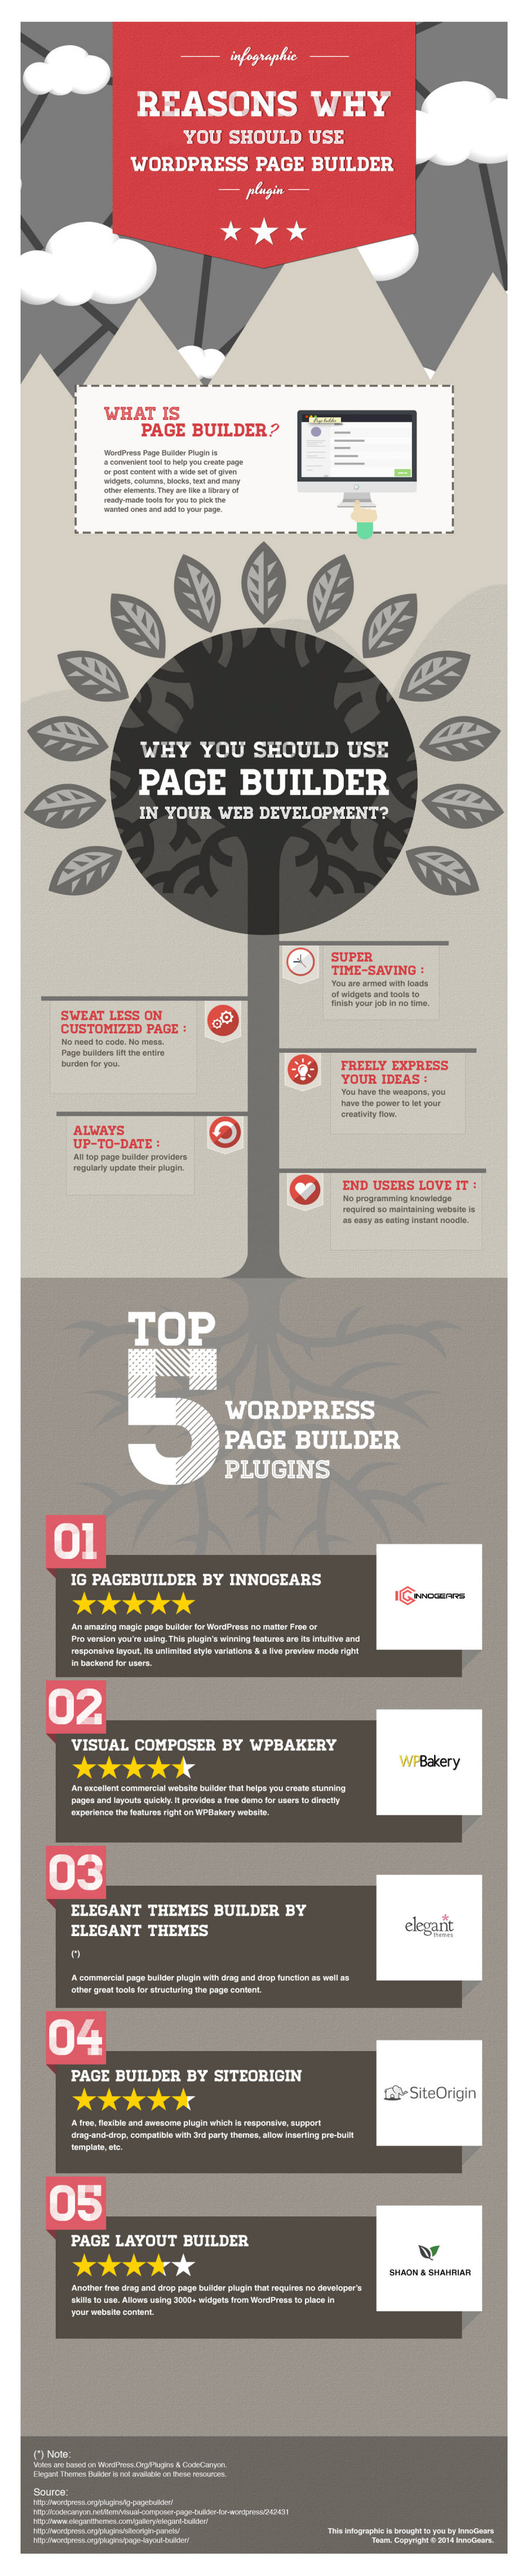 Why You Should Use WordPress Page Builder